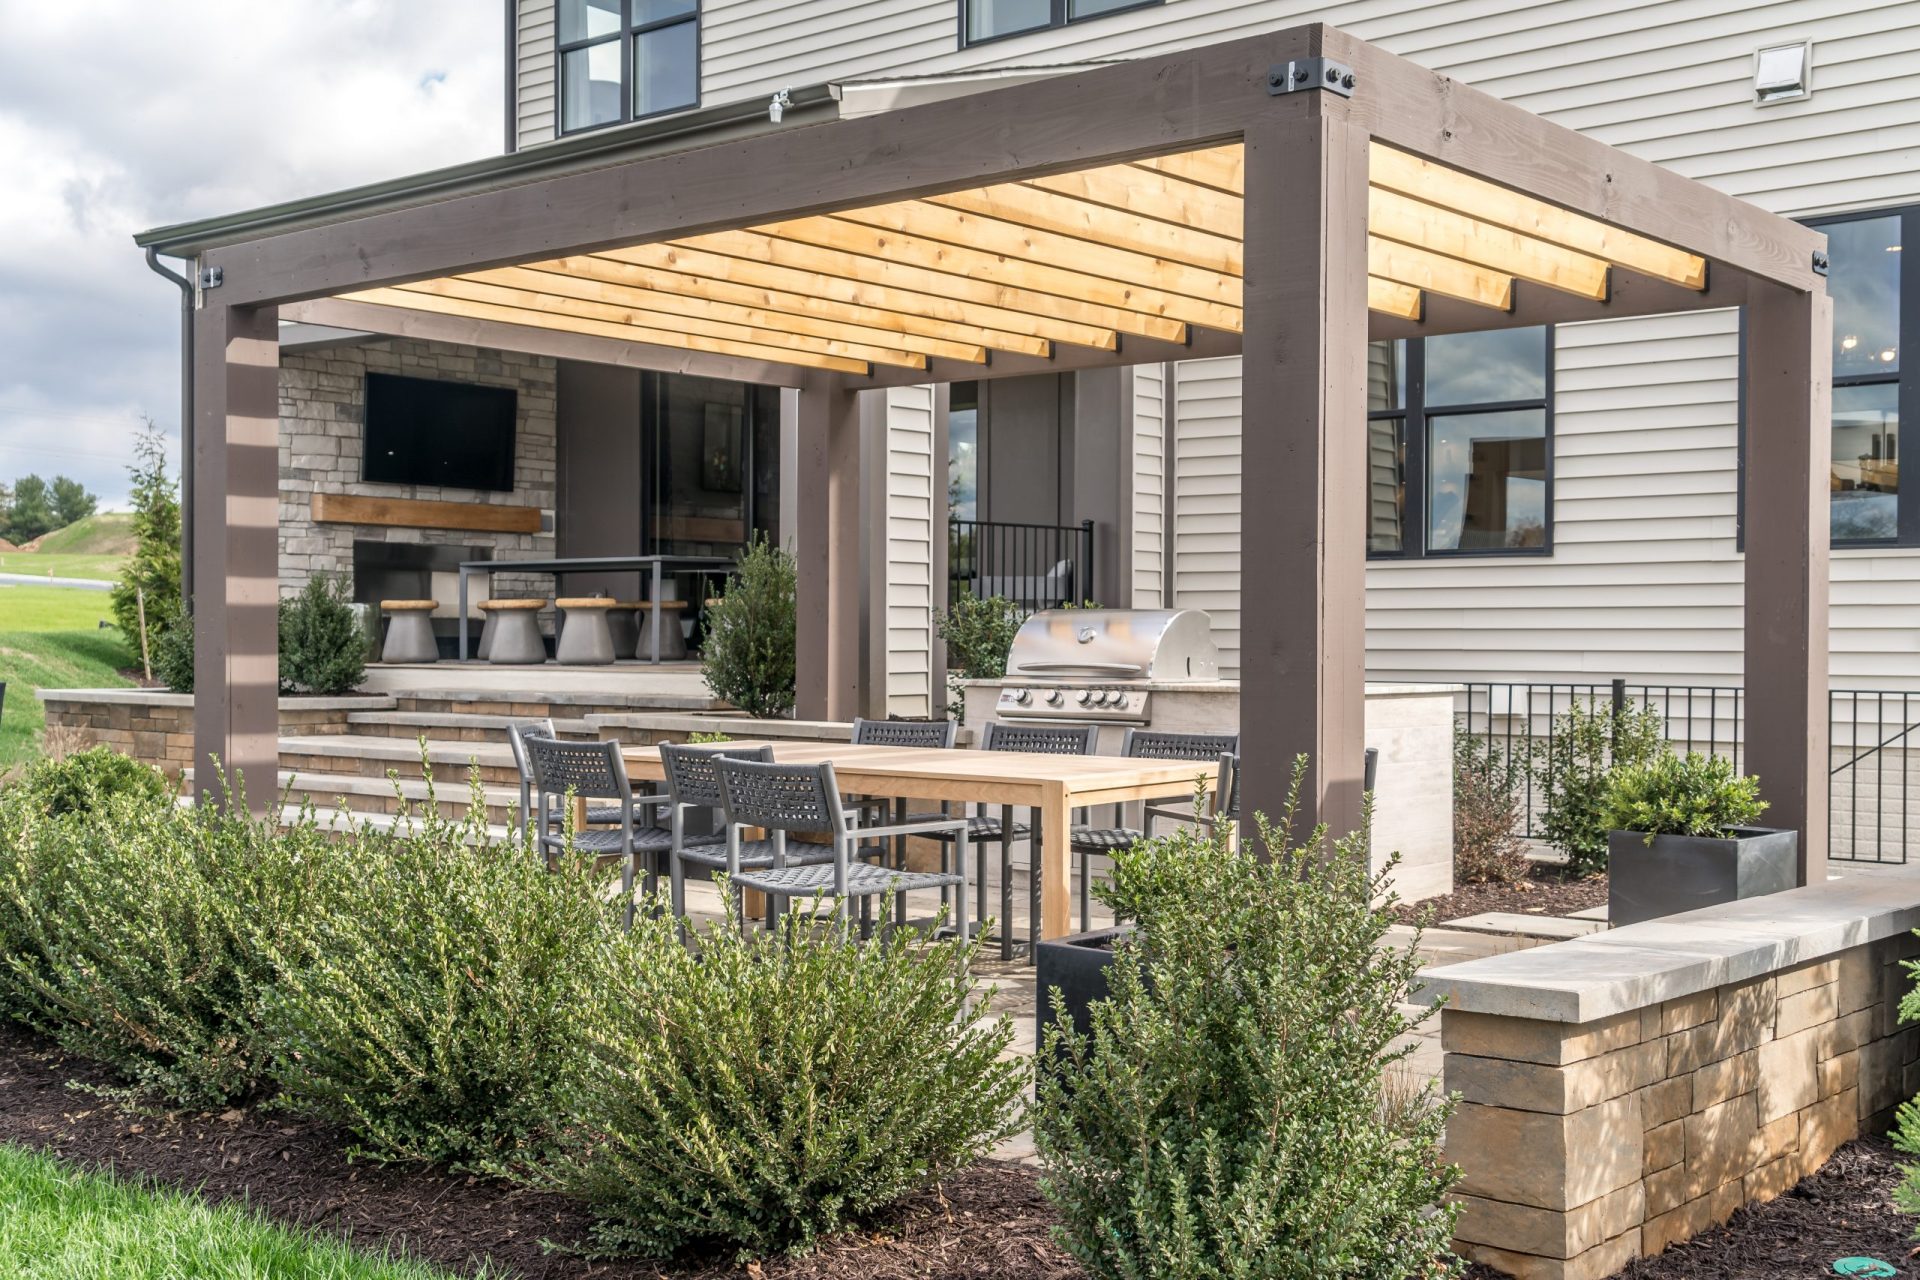 Can You Grill Under a Pergola? - Cook. Drink. Decorate.